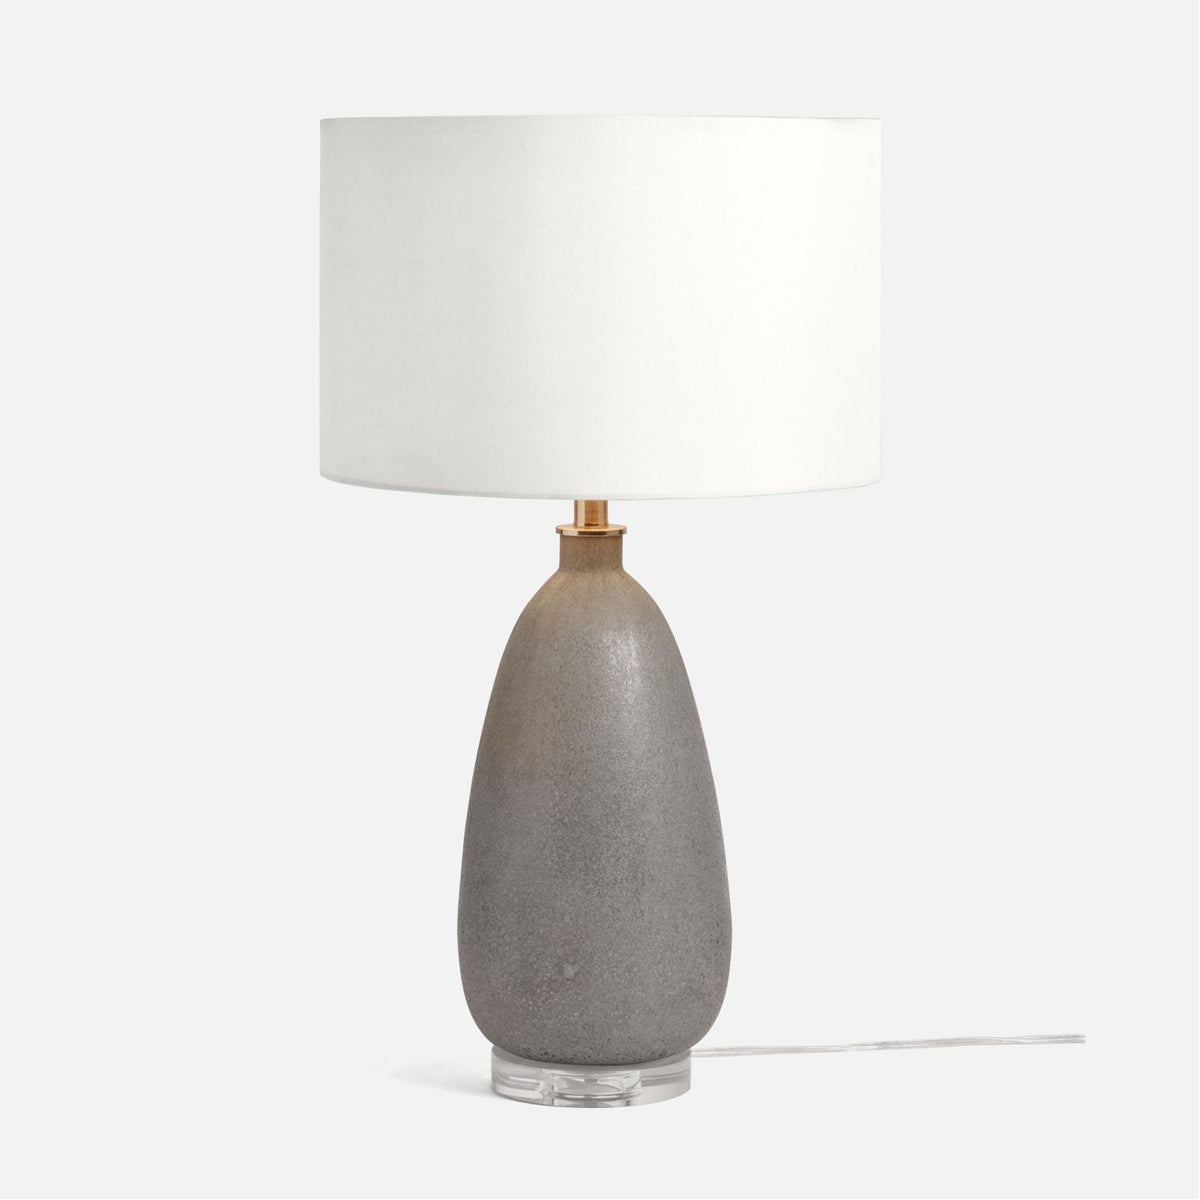 Made Goods Illarion Pebble-Shaped Table Lamp